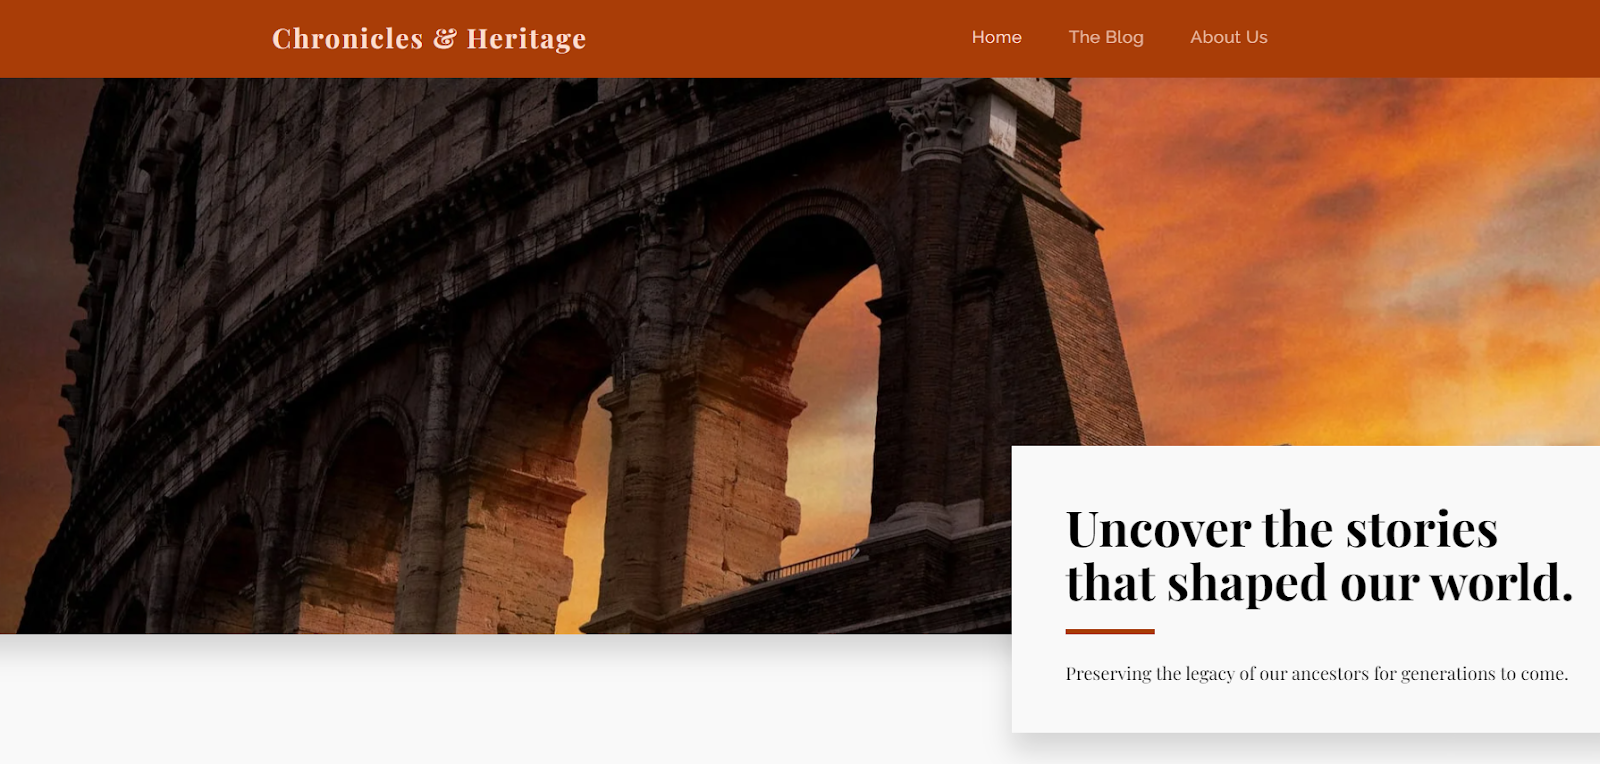 SITE123's 'Chronicles and Heritage' template